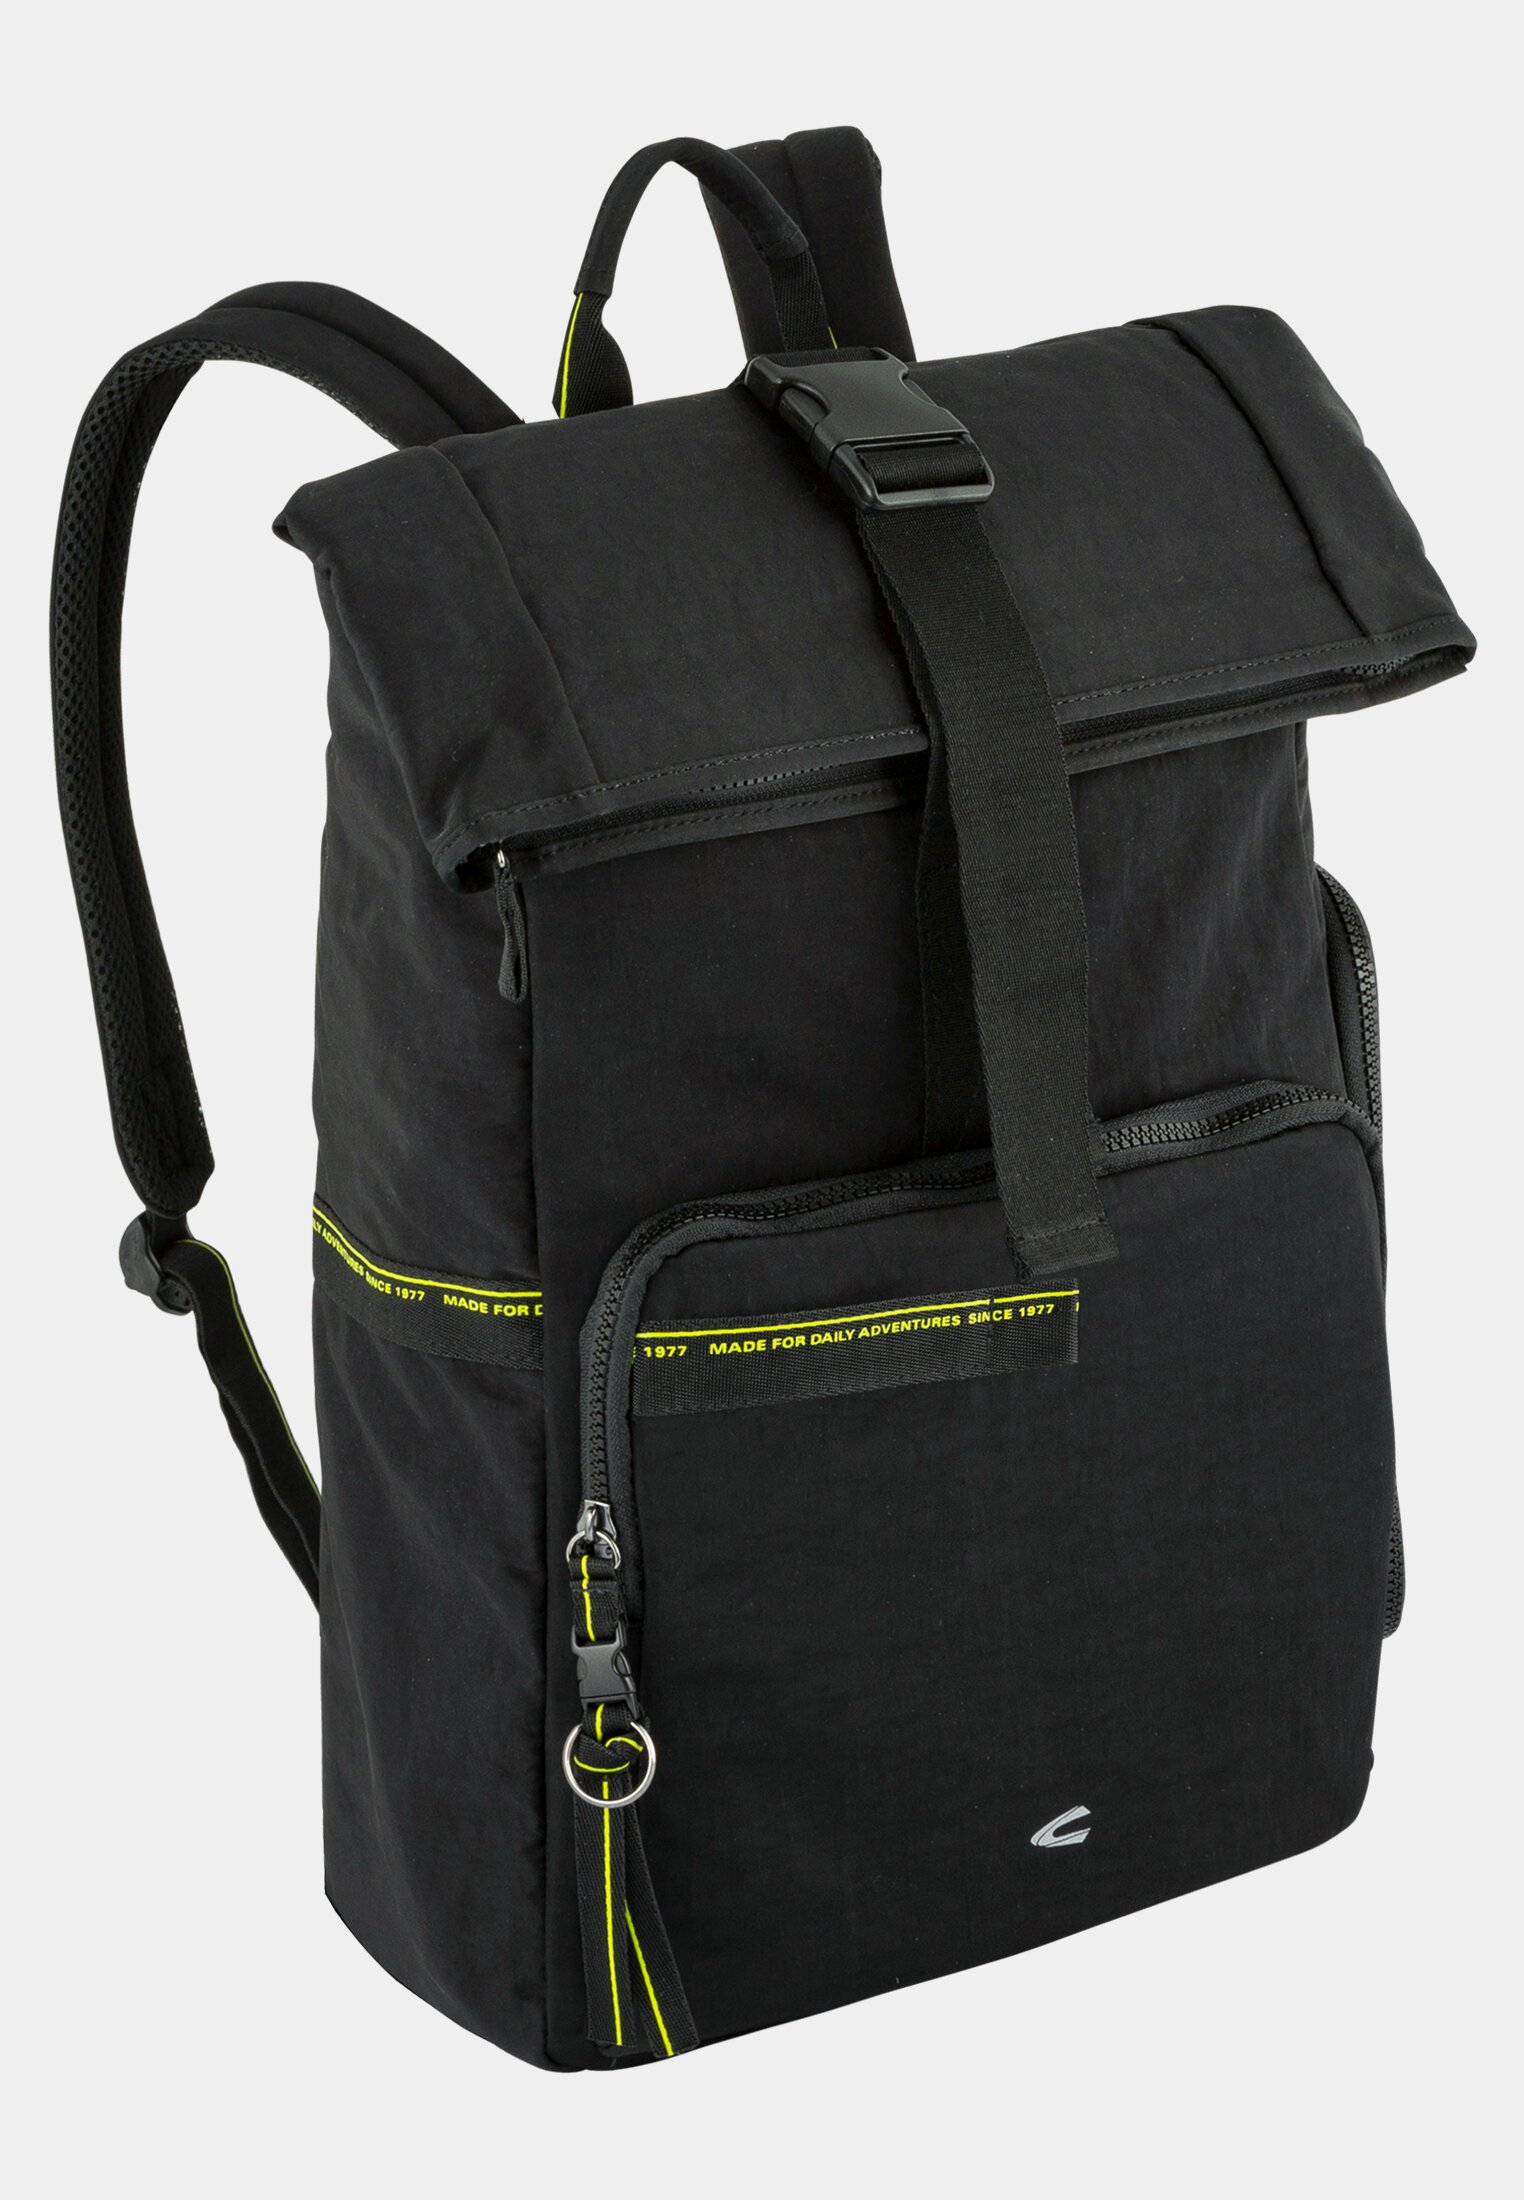 Camel Active Backpack with generous stowage options